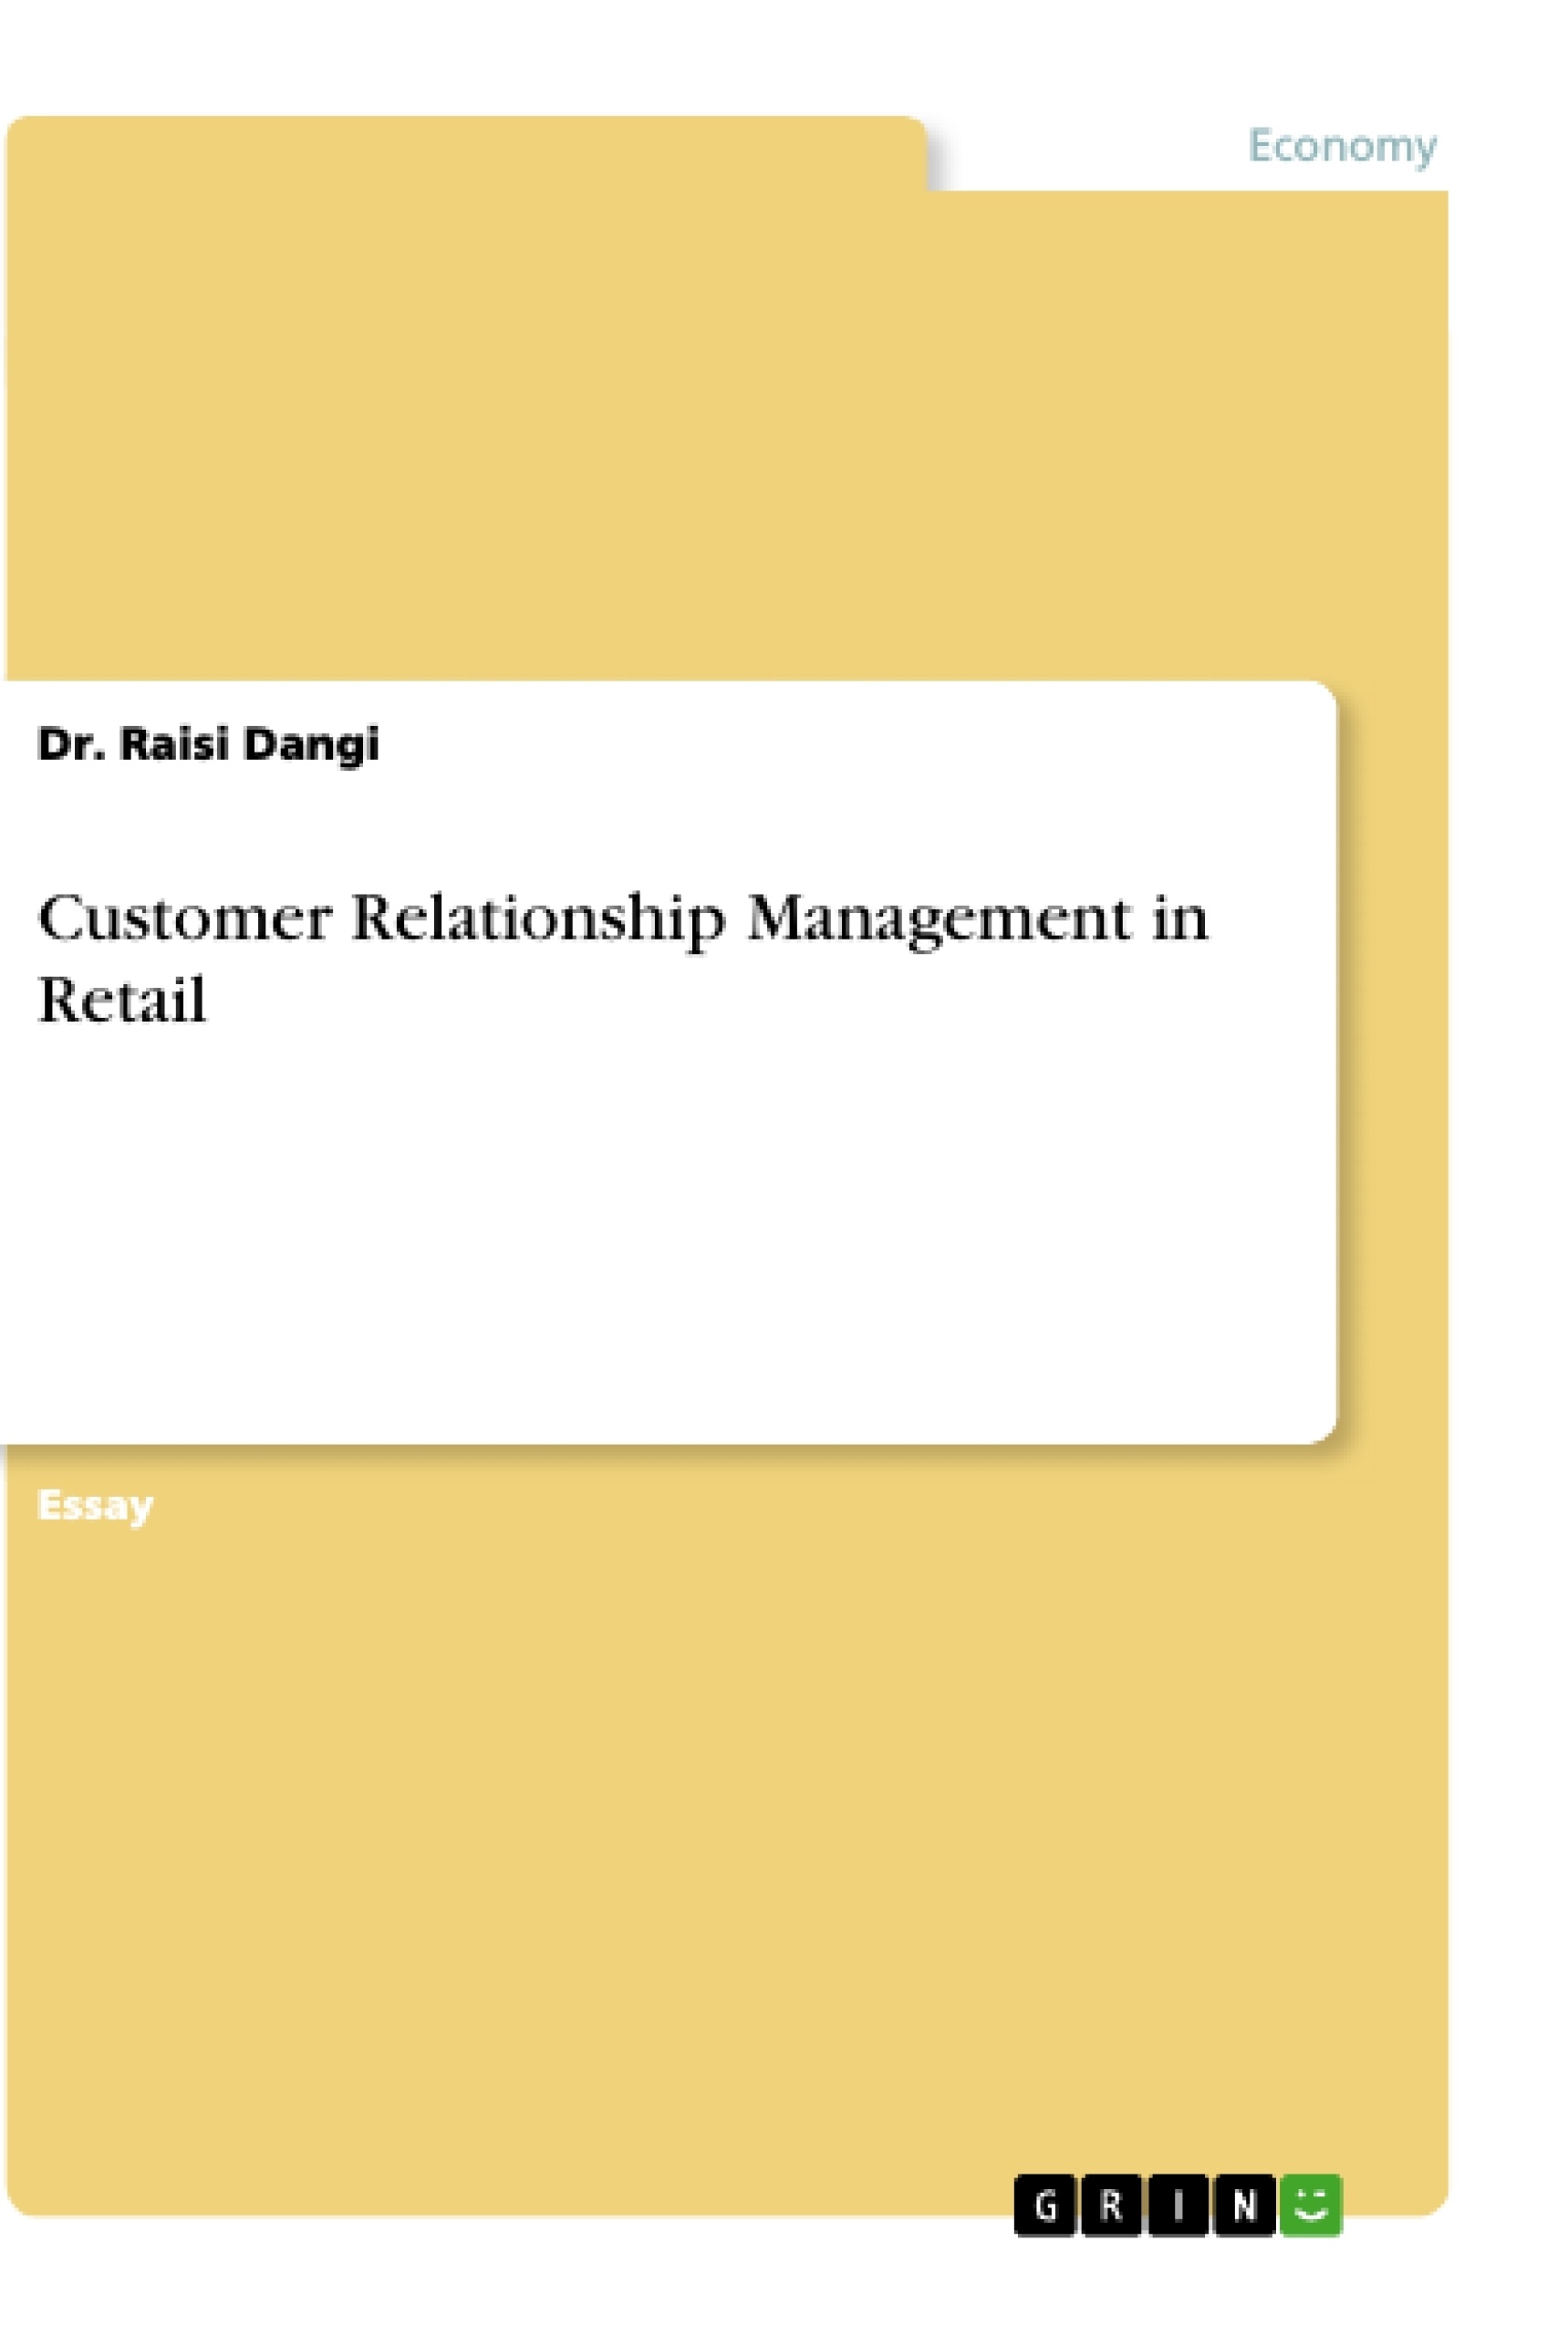 Título: Customer Relationship Management in Retail